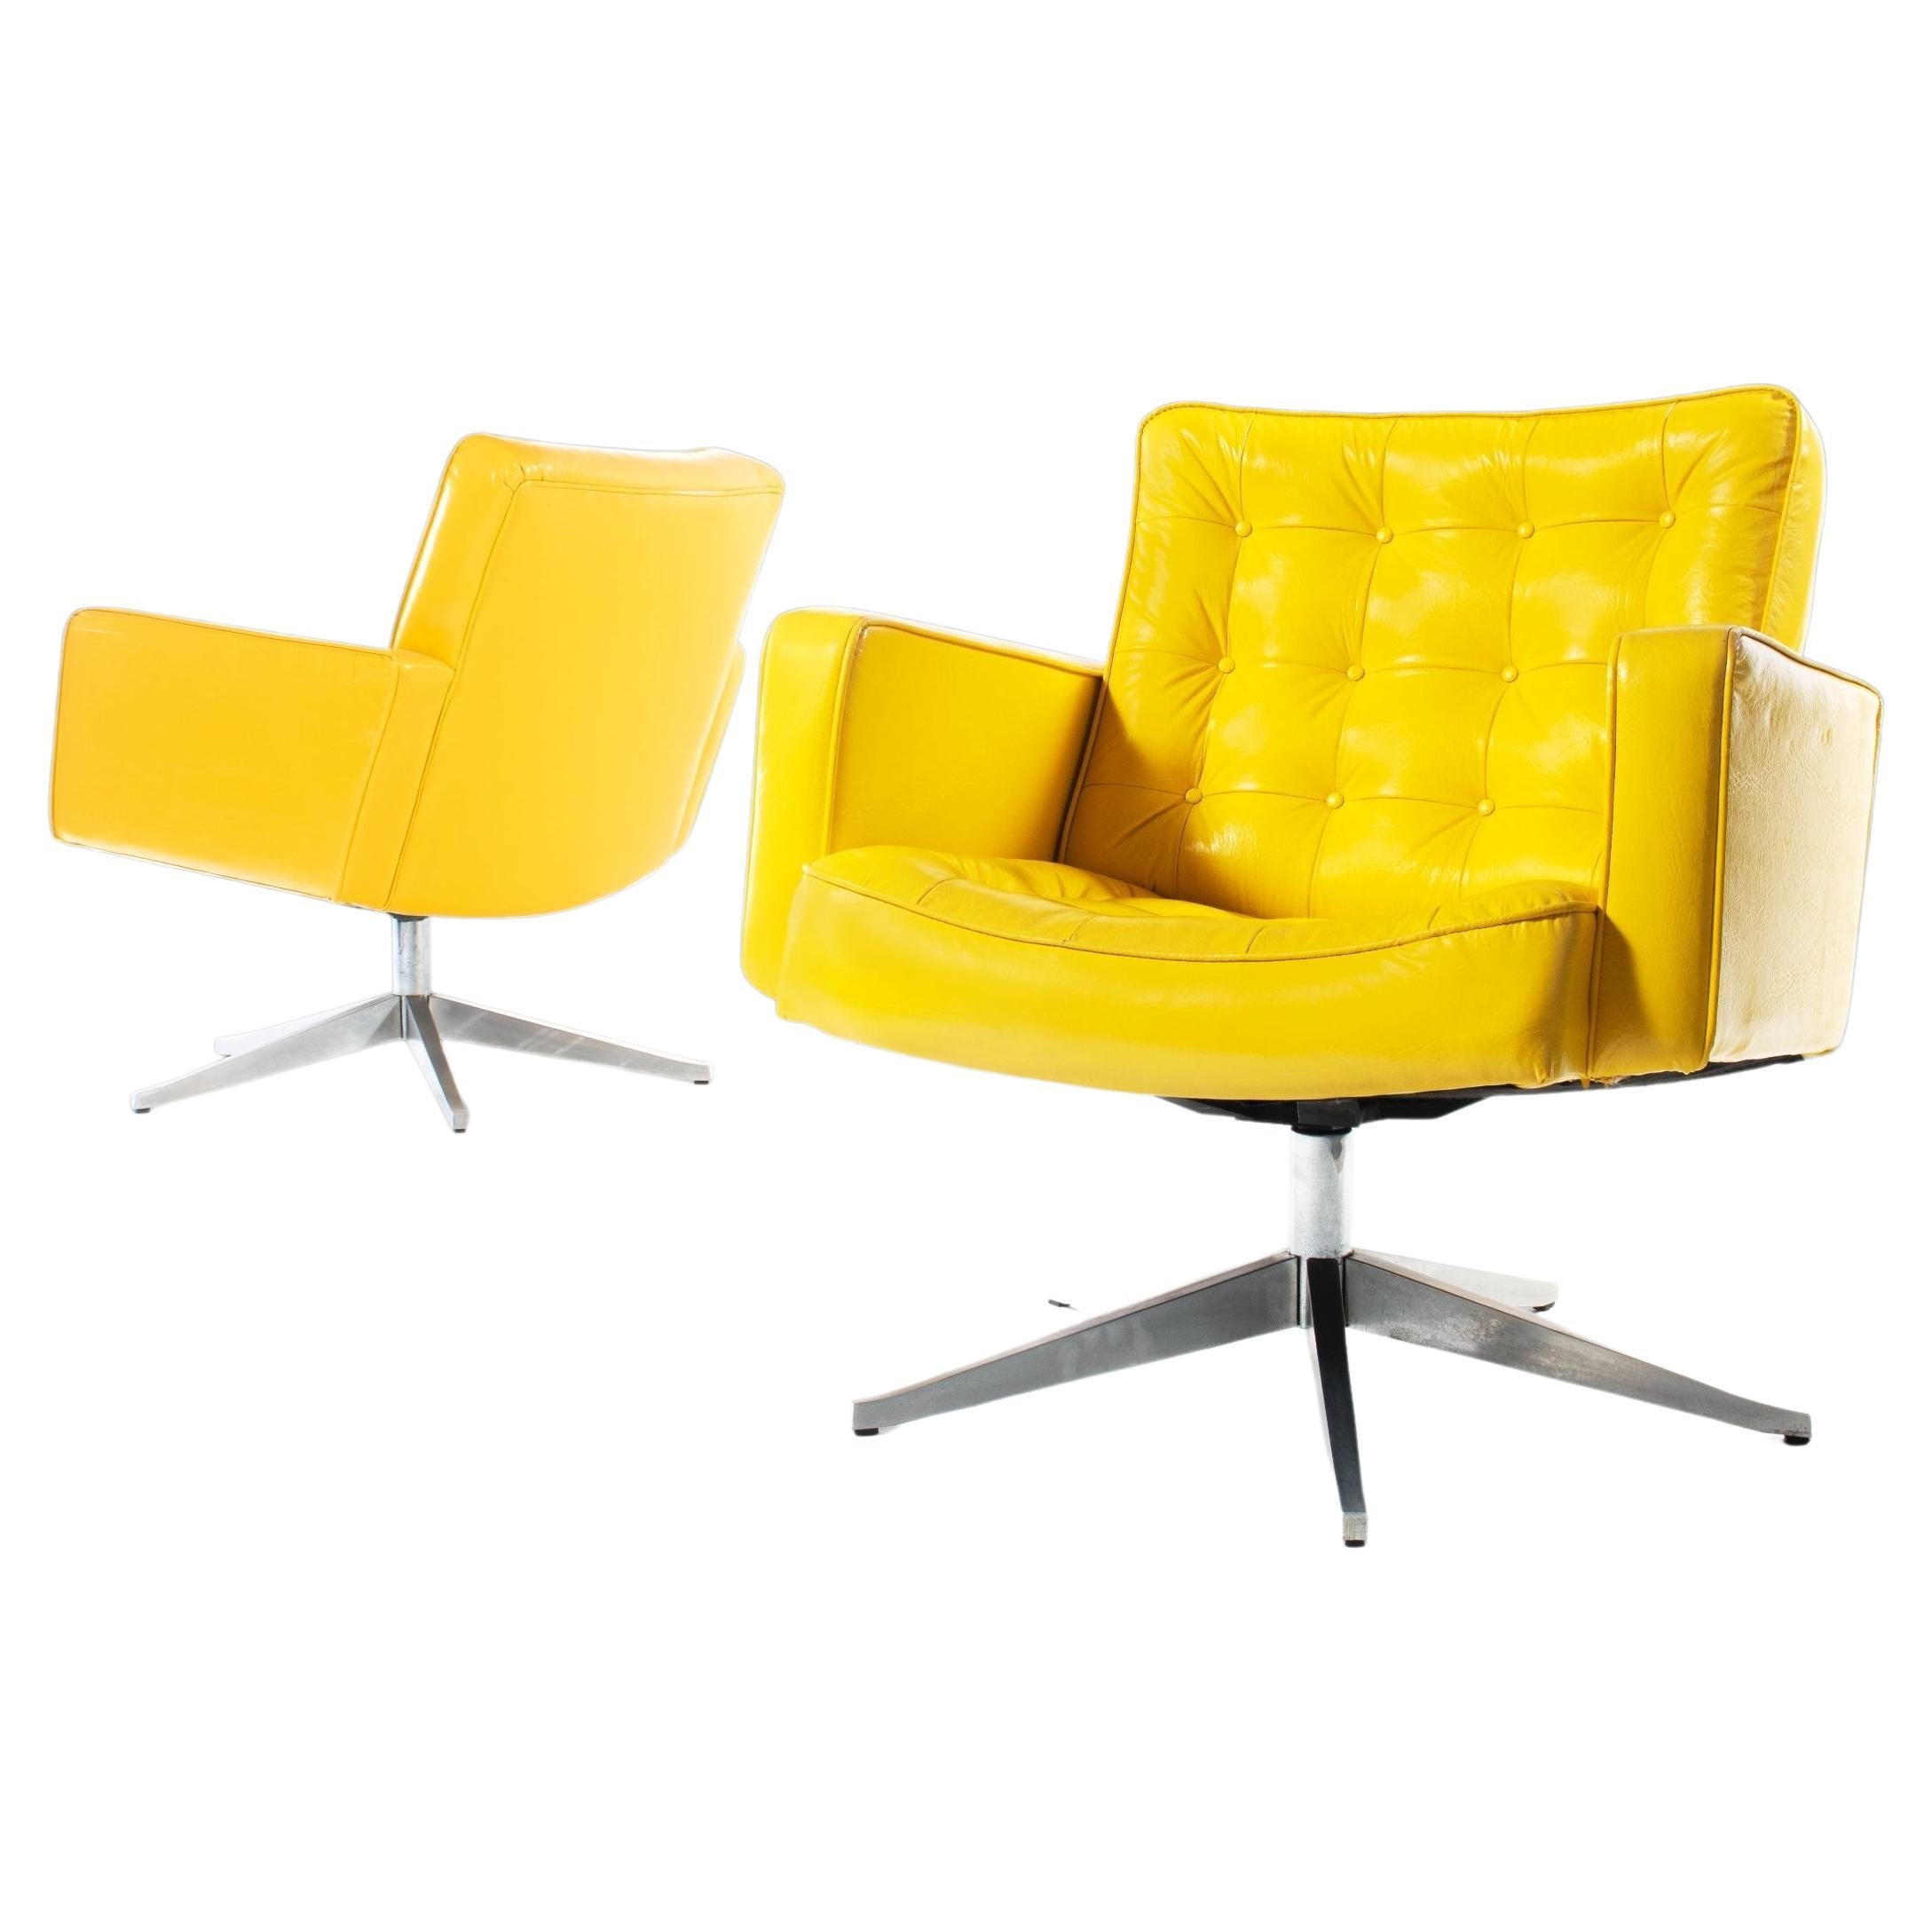 Set of Two '2' Swivel Lounge Chairs Vincent Cafiero for Knoll, USA, c. 1960's For Sale